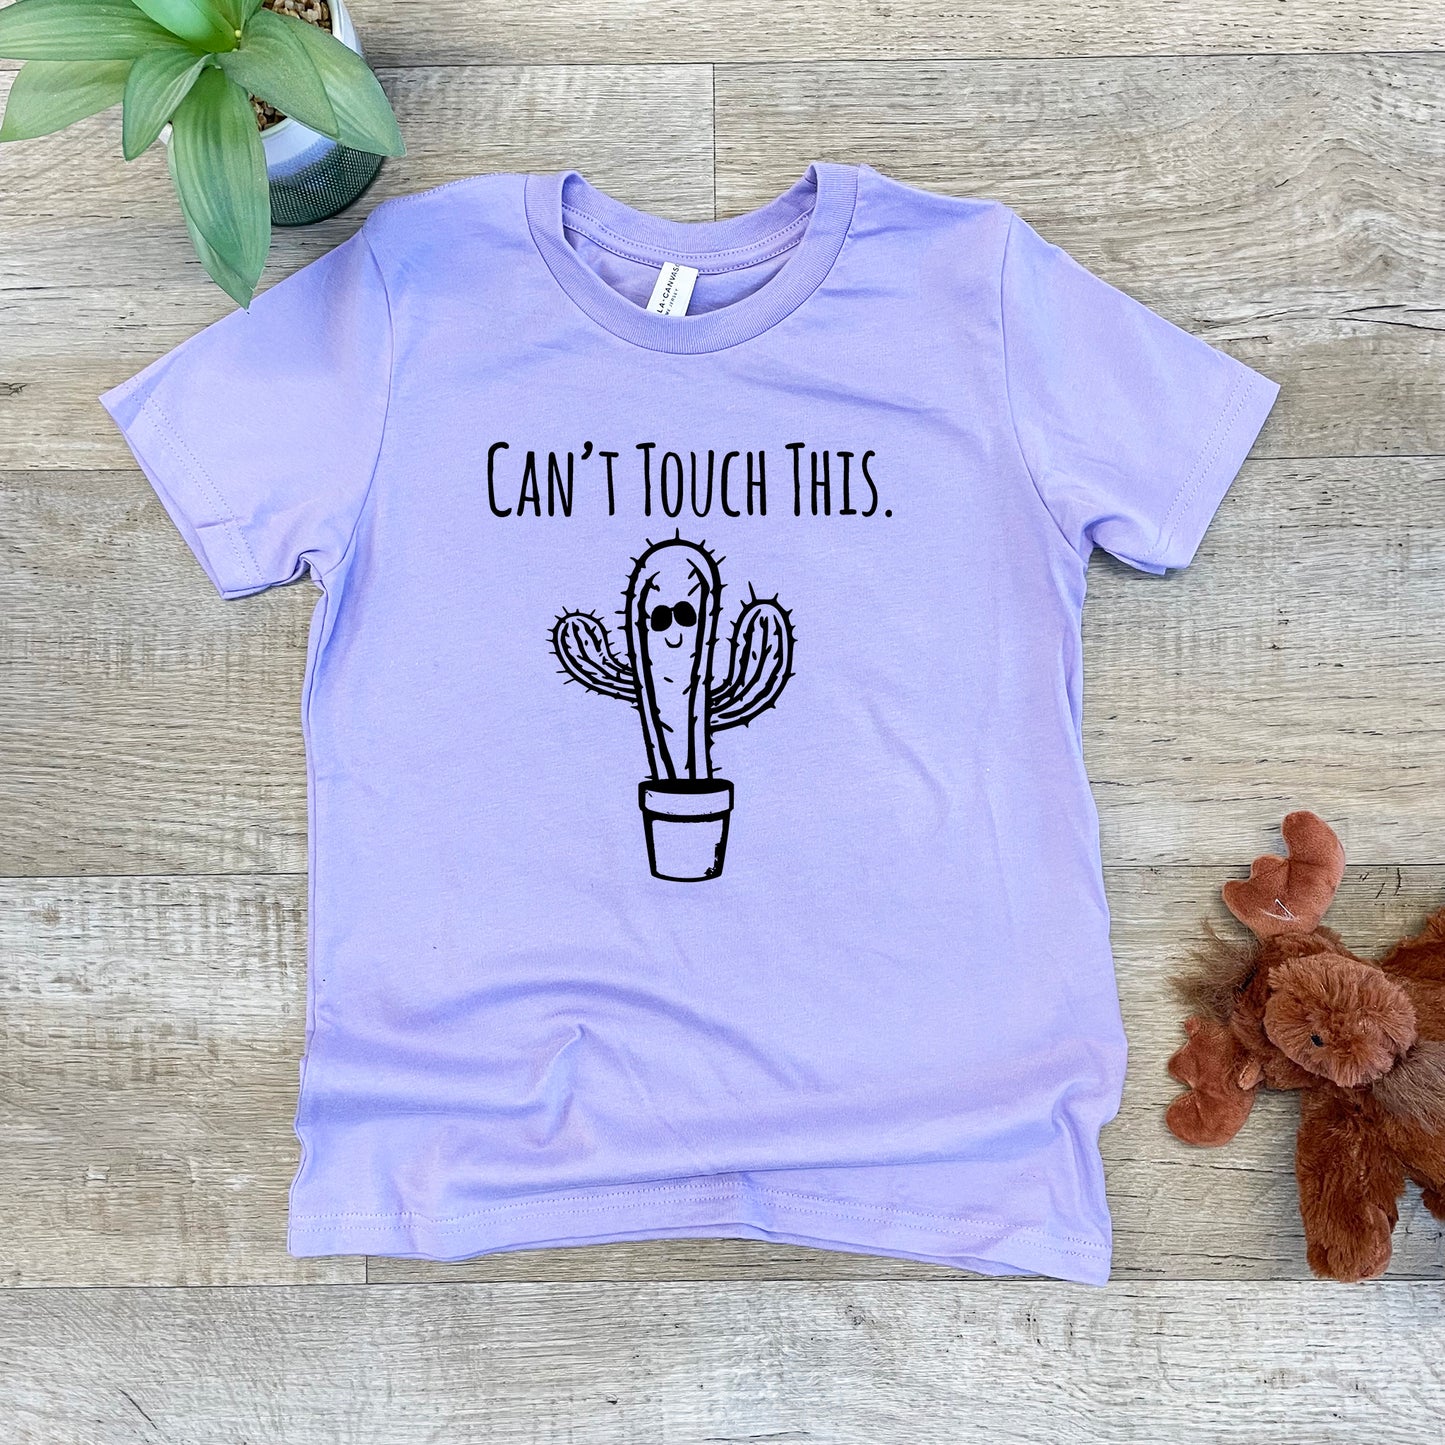 Can't Touch This (Cactus) - Kid's Tee - Columbia Blue or Lavender